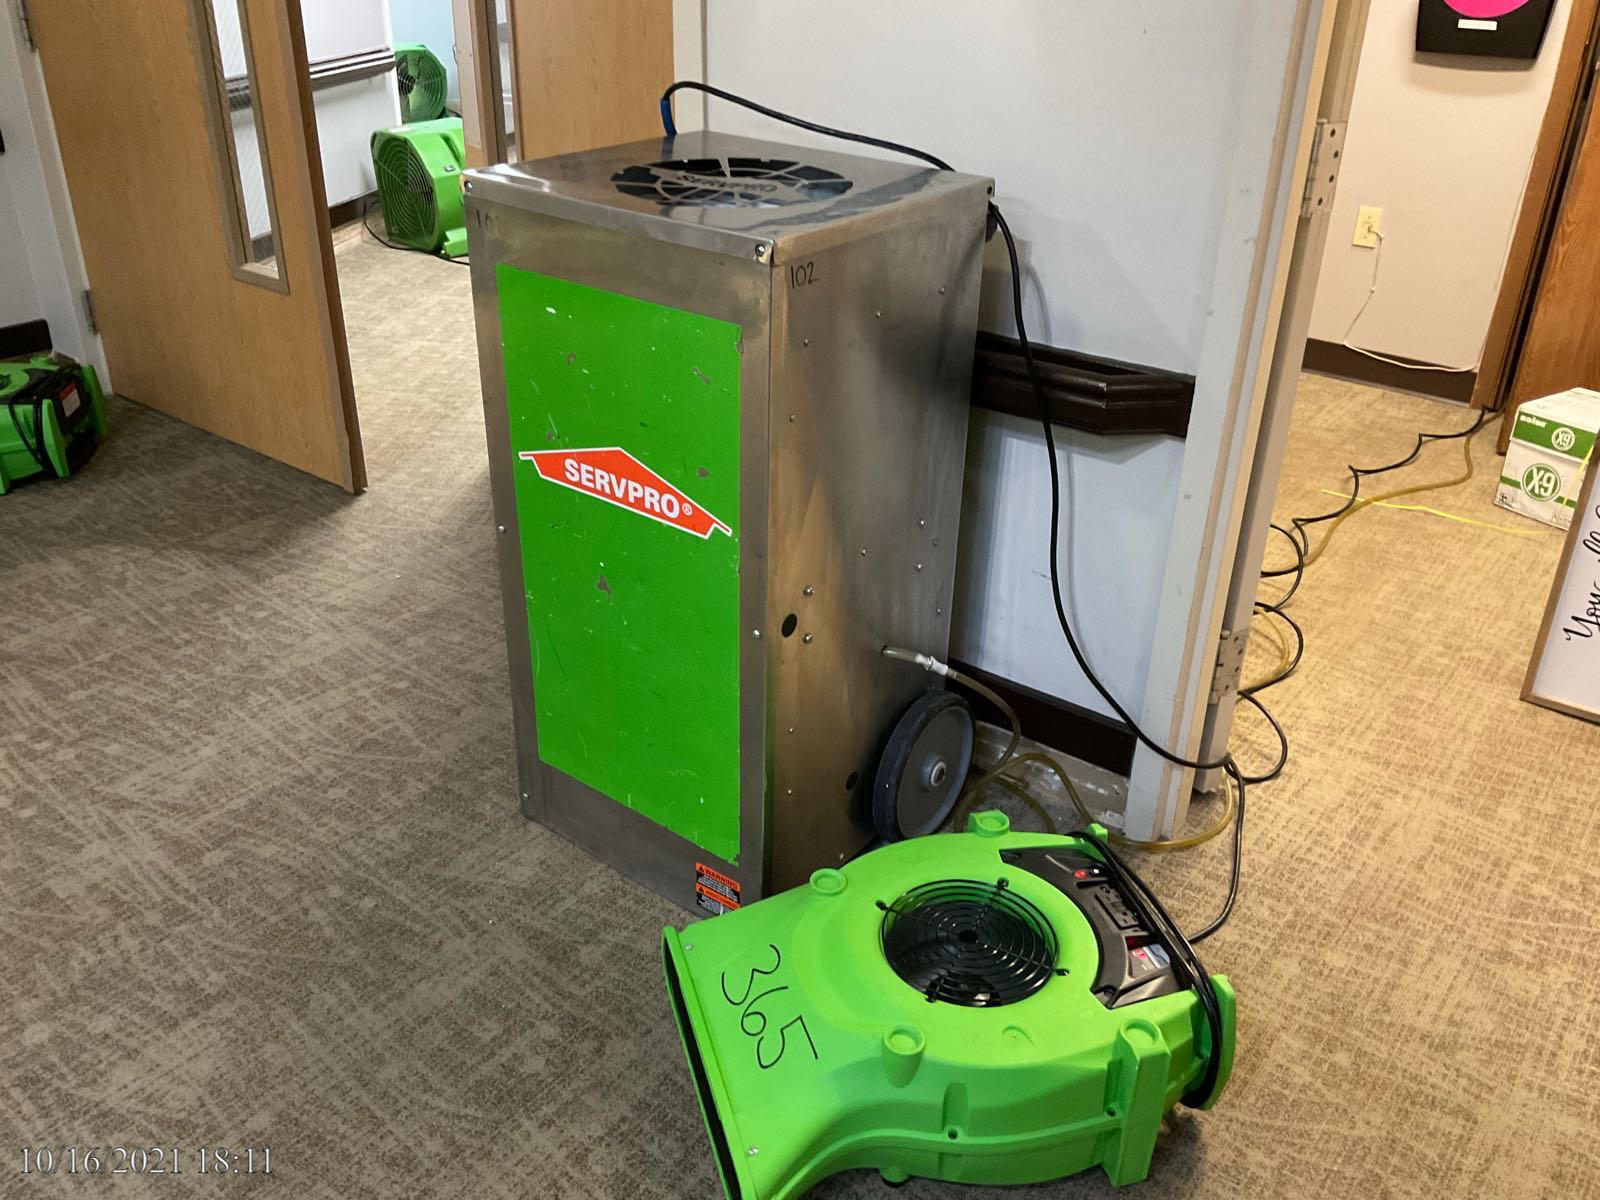 SERVPRO of South & East Stark County dehumidifier and fan drying a commercial building.